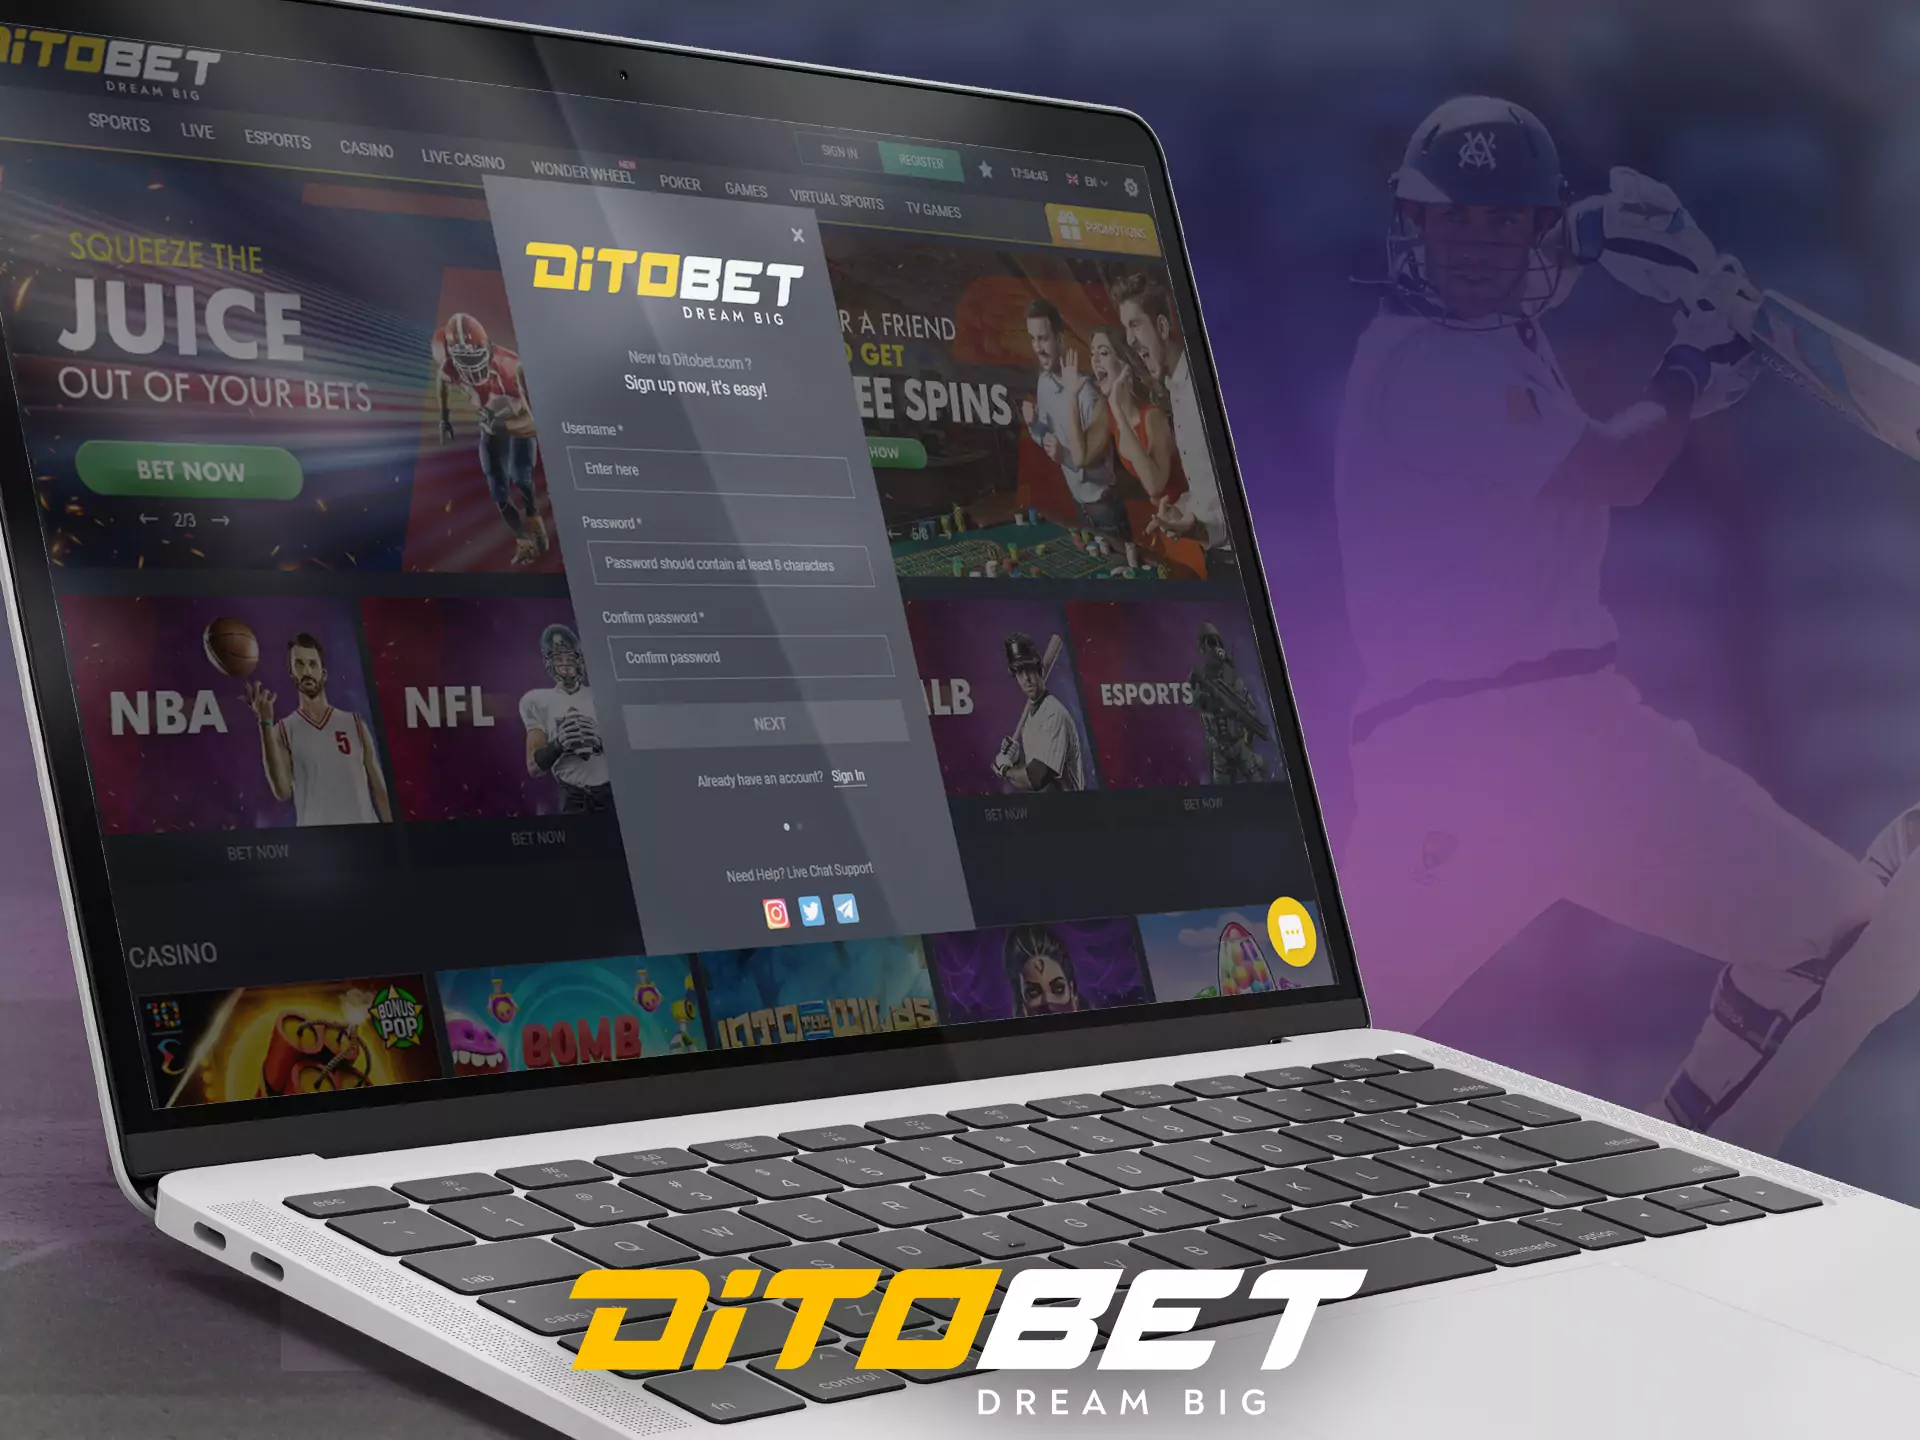 Go through a simple and quick registration on Ditobet to get all the bonuses and benefits.